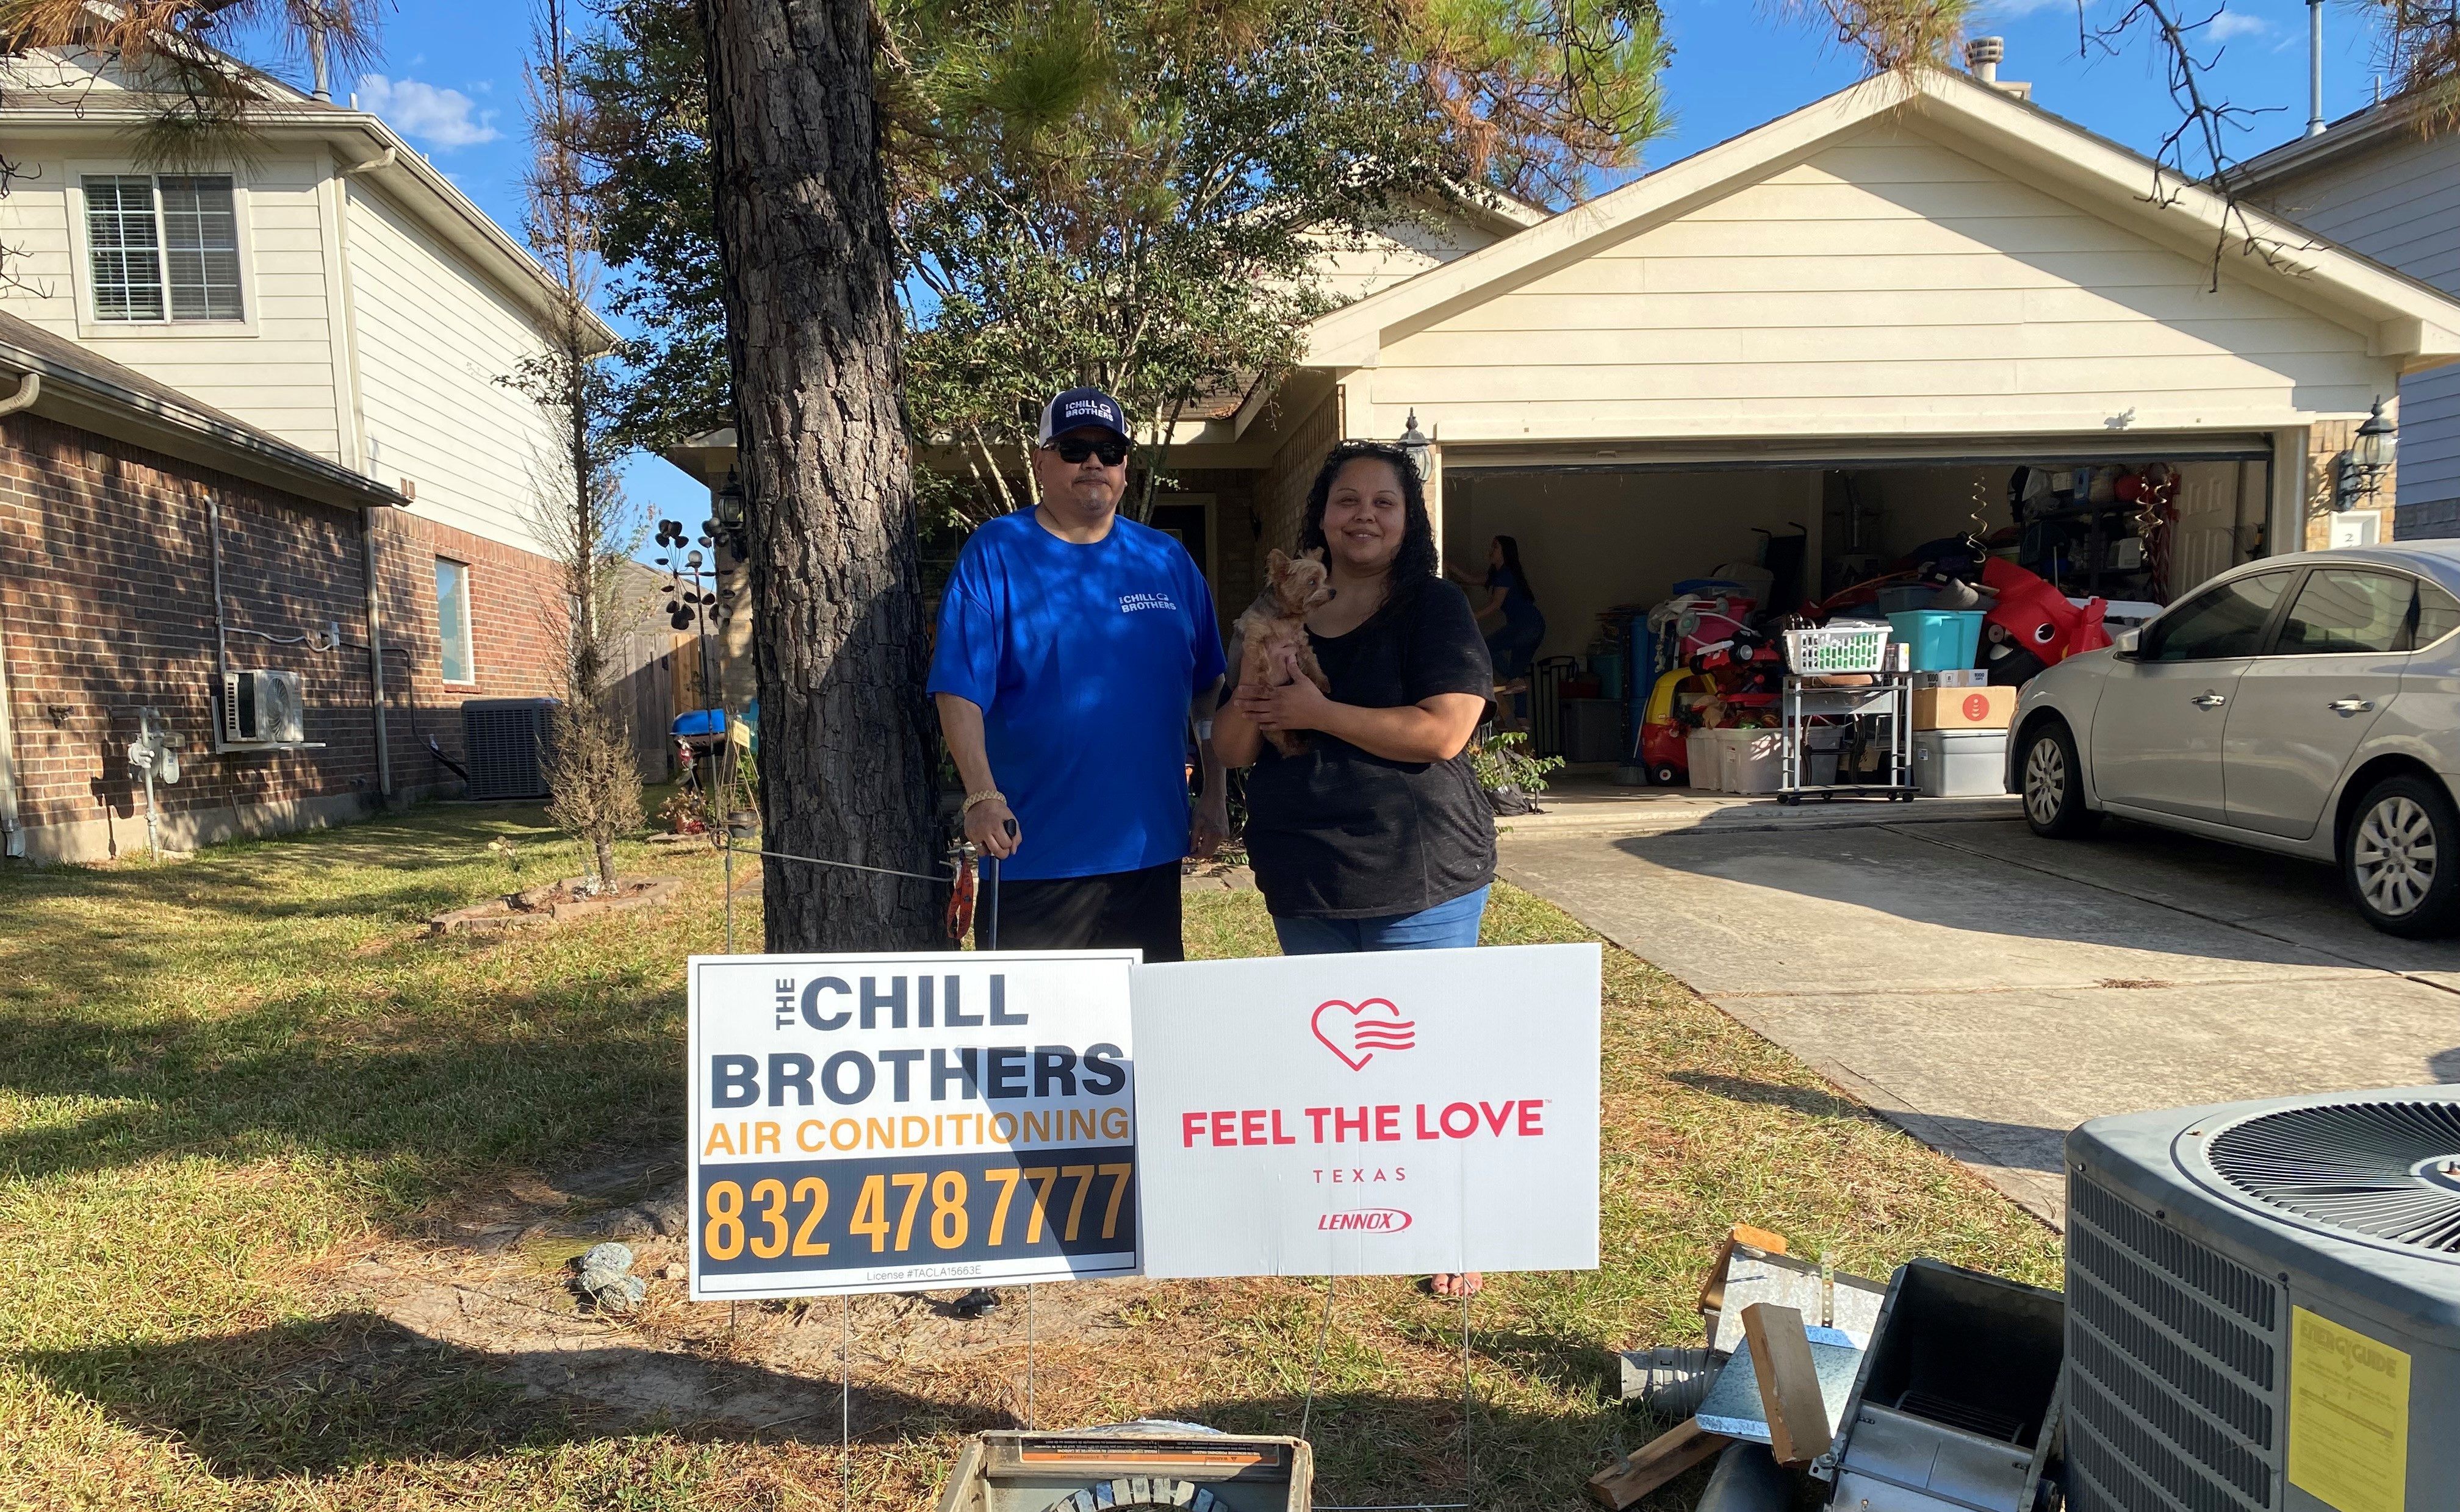 garza e1666214645957 The Chill Brothers Partnered with Lennox Feel the Love Program